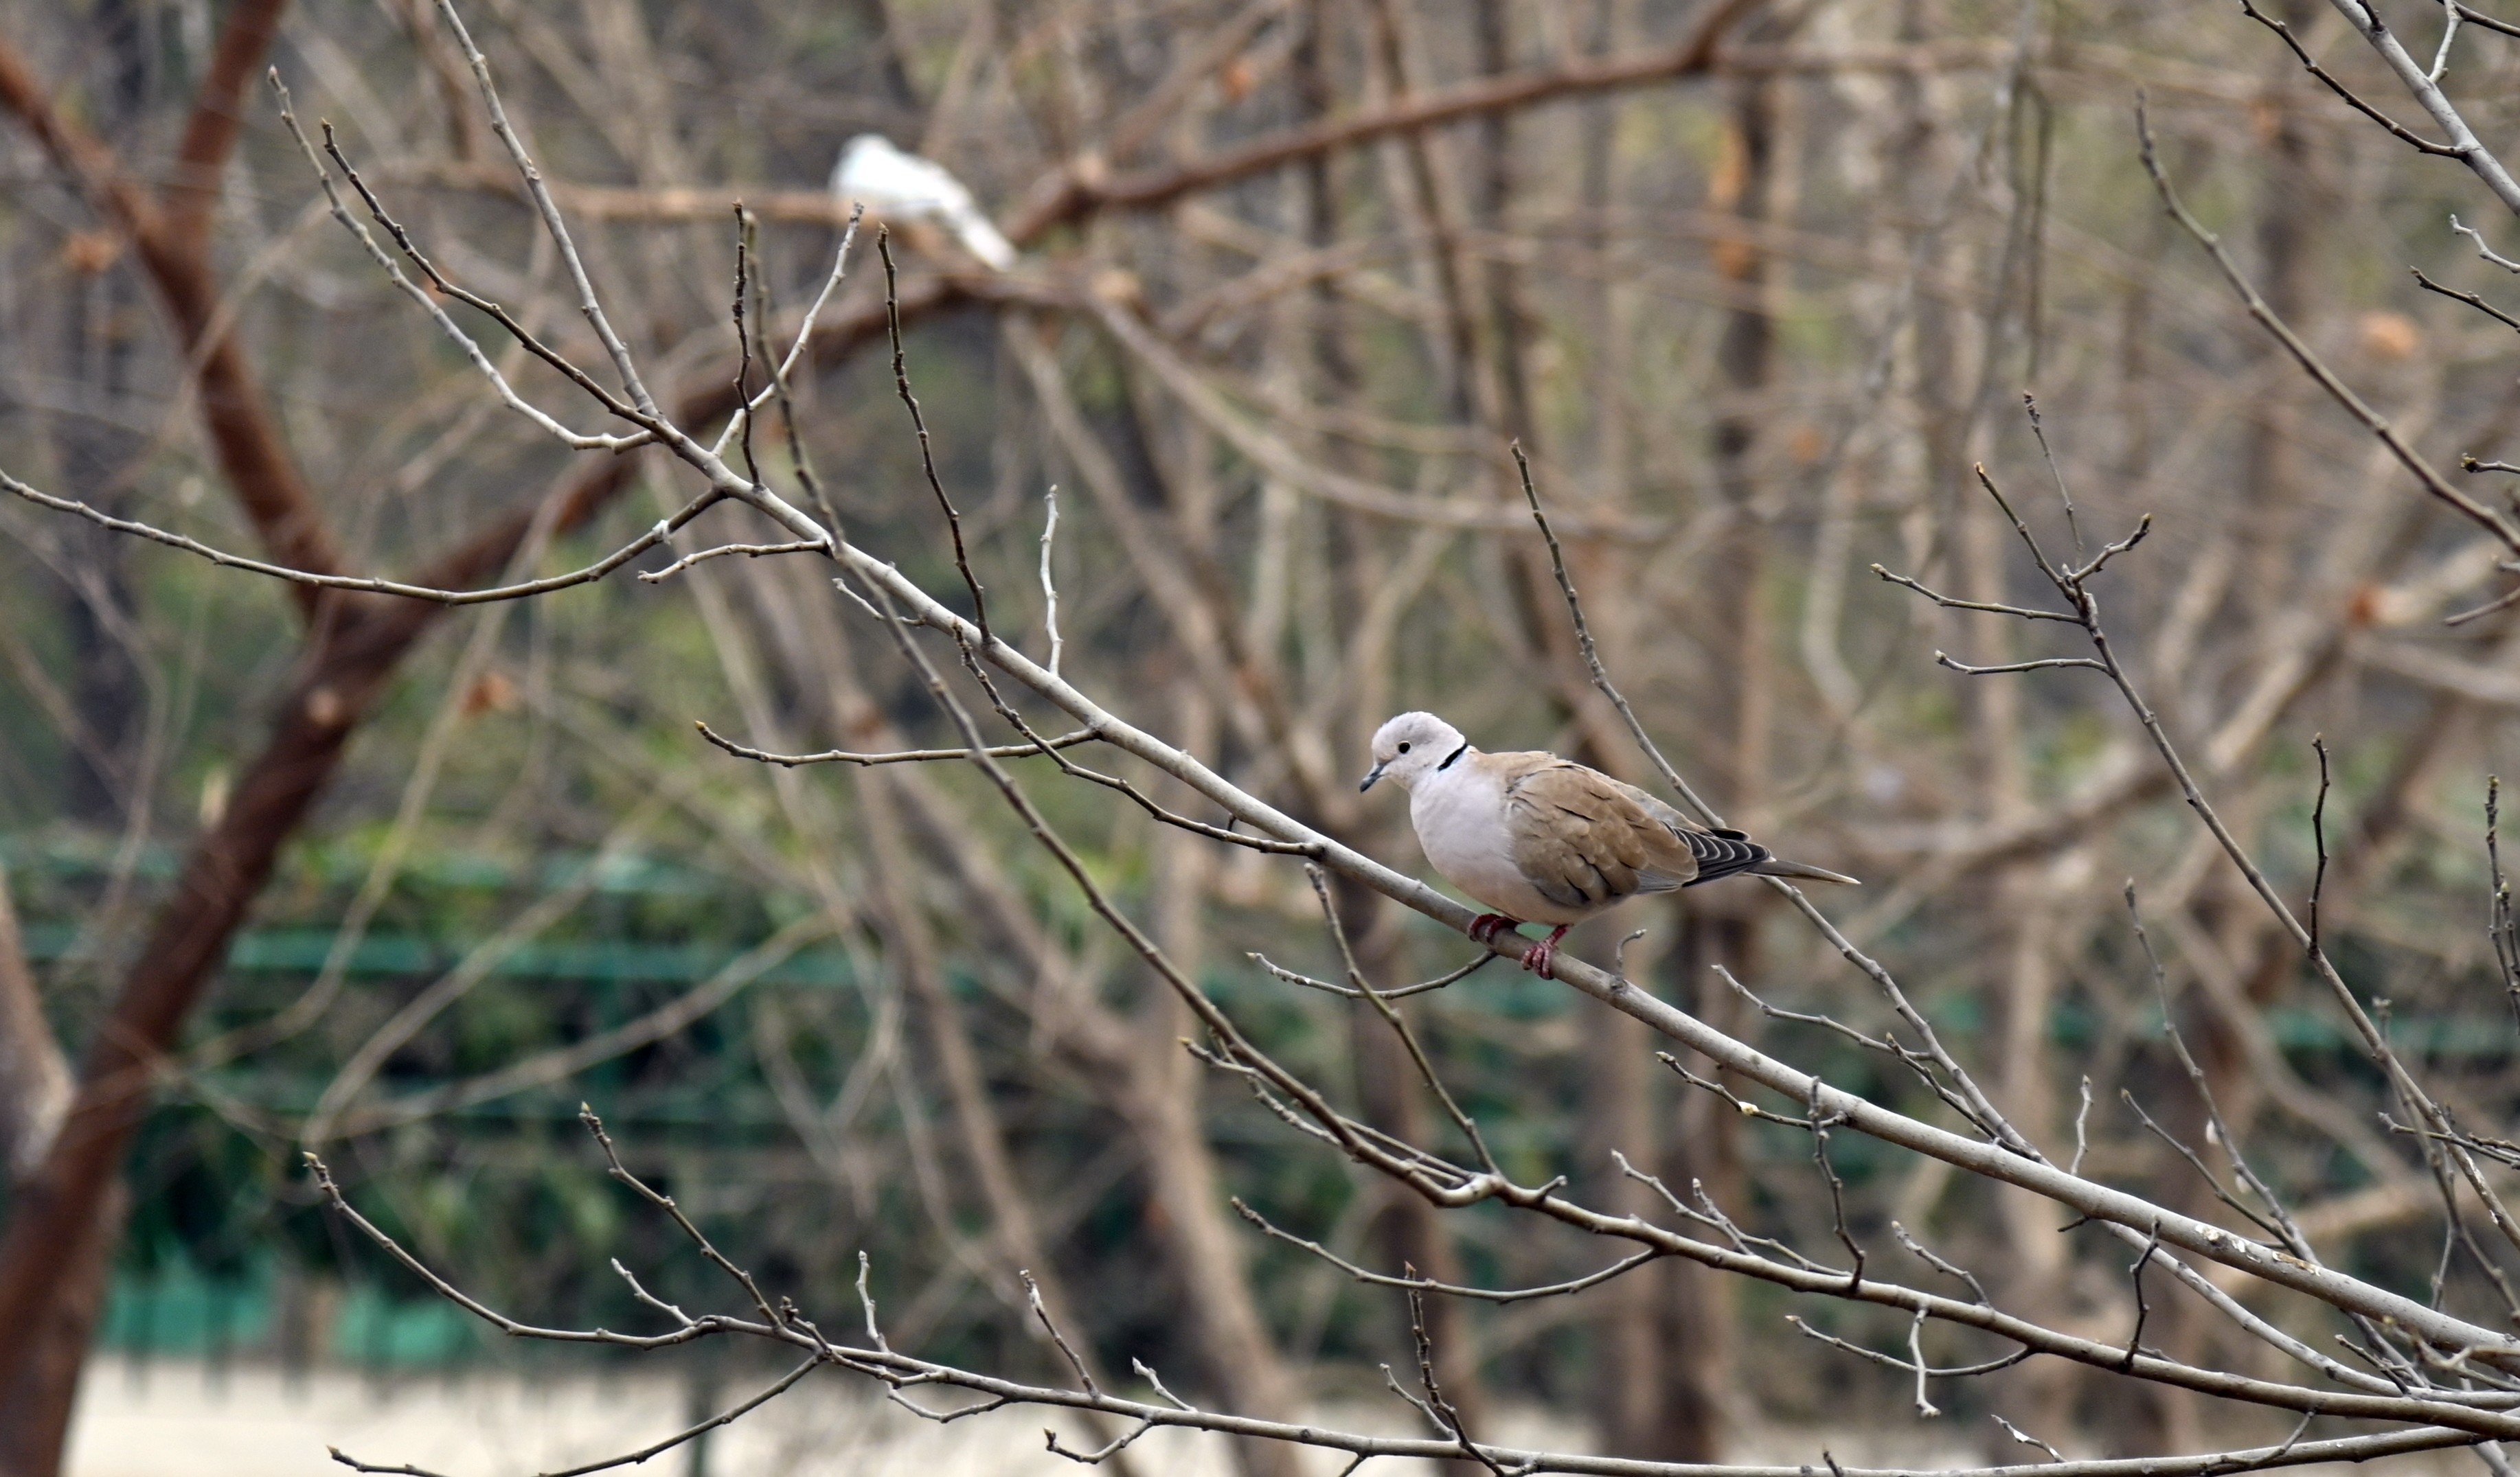 A Barbary Dove sitting on the branch of tree